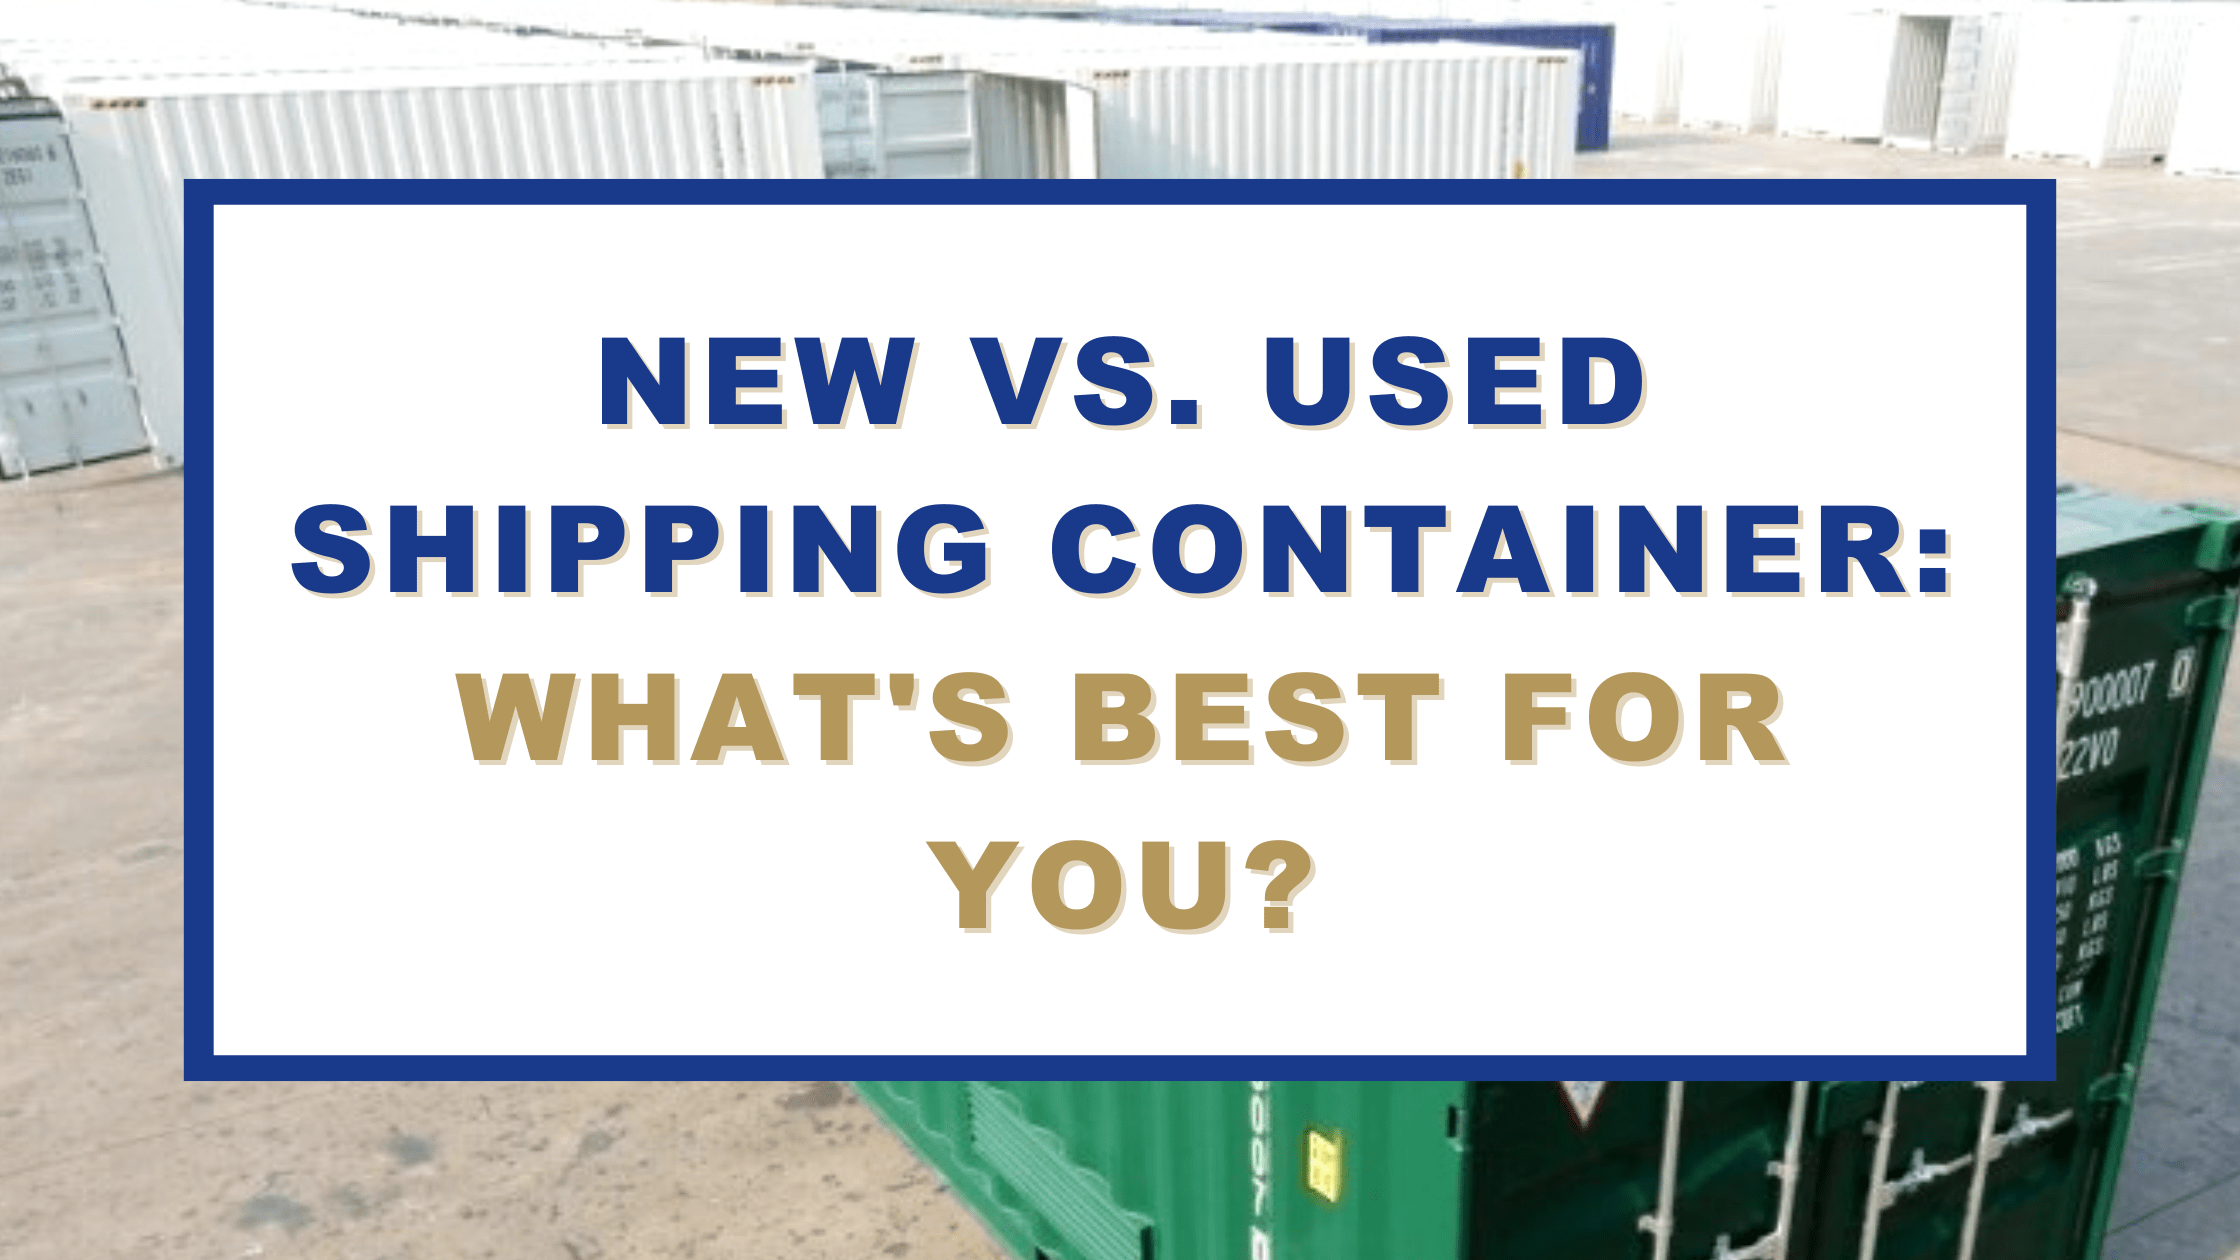 Title: New vs Used Shipping Container: what's best for you?